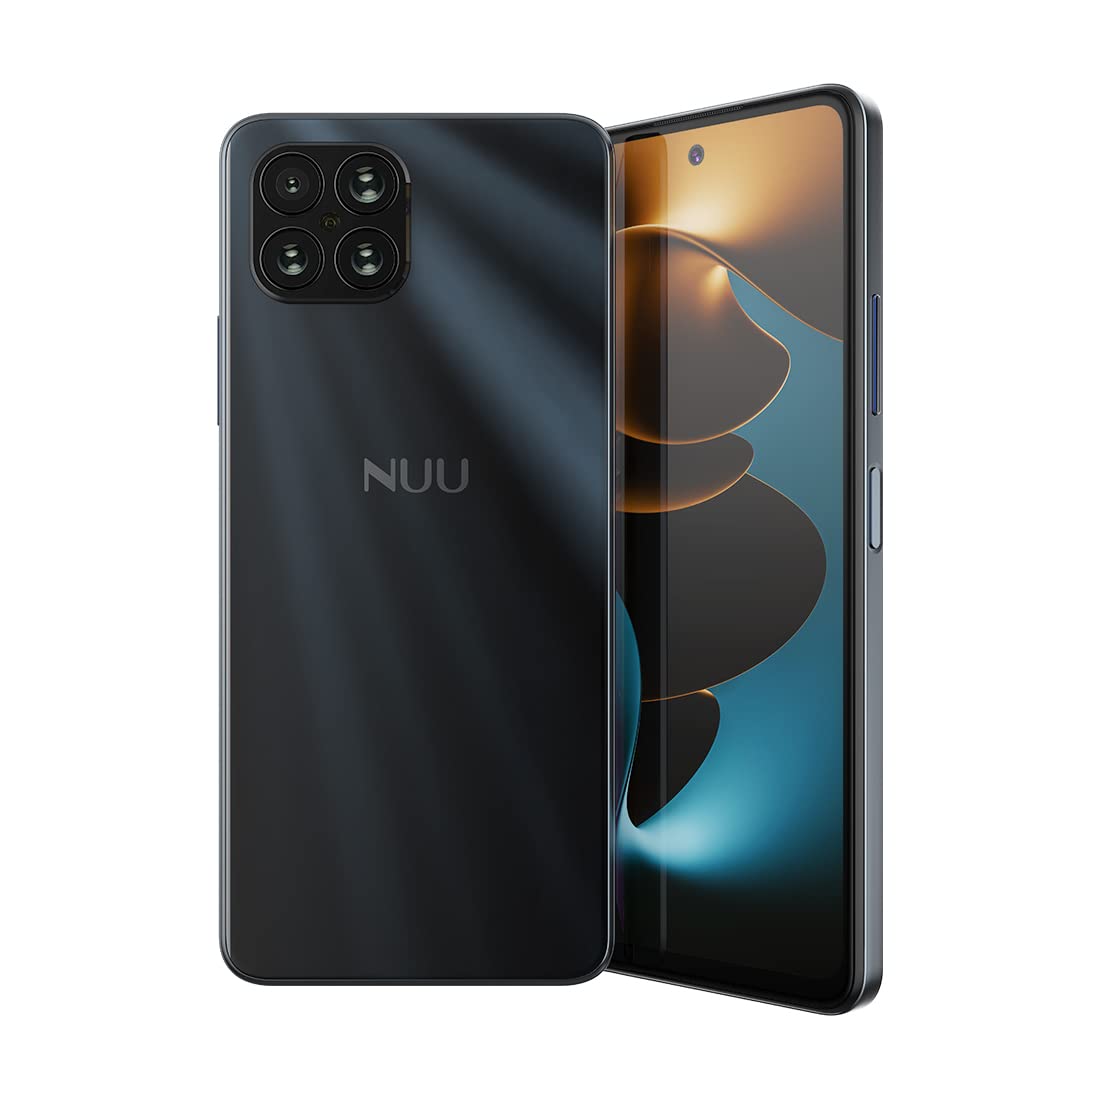 NUU B15 | Black | 48 MP | Quad-Camera | Unlocked (T-Mobile Only) | 6.78'' Full HD+ Display | 128GB | 90Hz | 18W Fast Charge | 5000 mAh | Fingerprint | Android 11 Wireless Earbuds Buds A